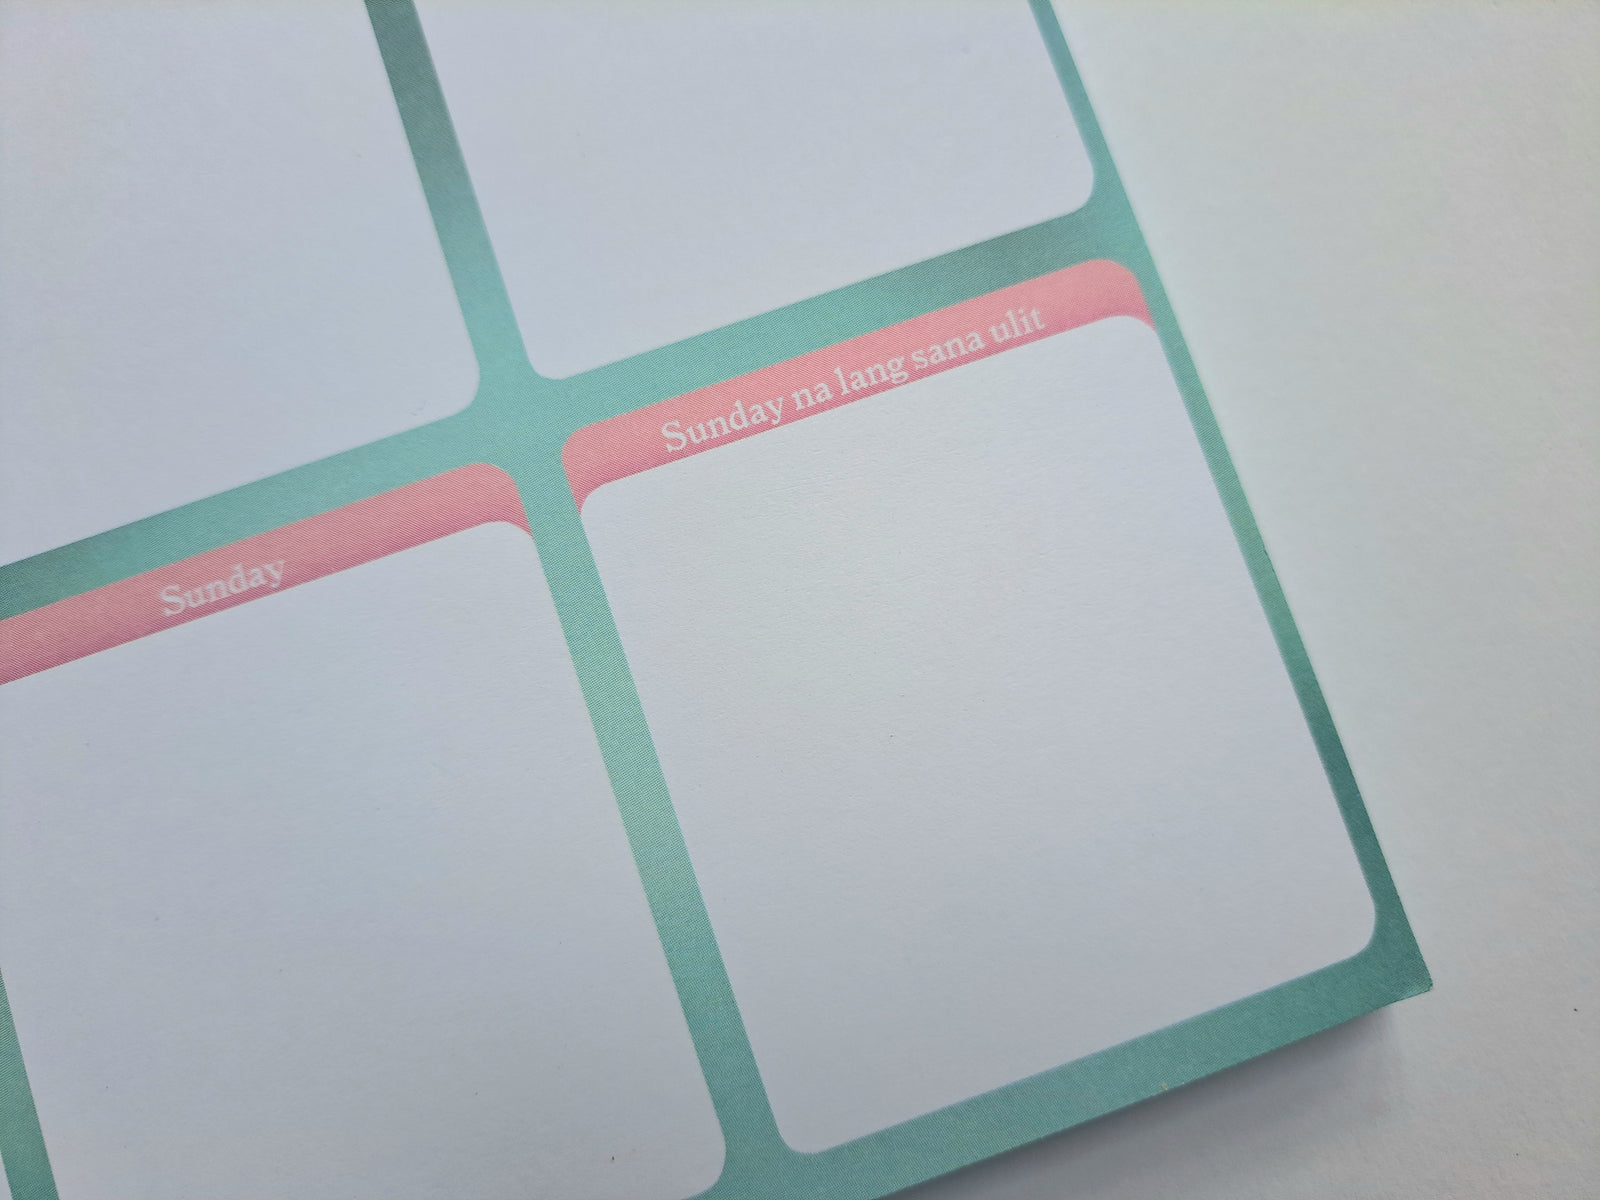 The Pang-motivate Weekly Planner Pads